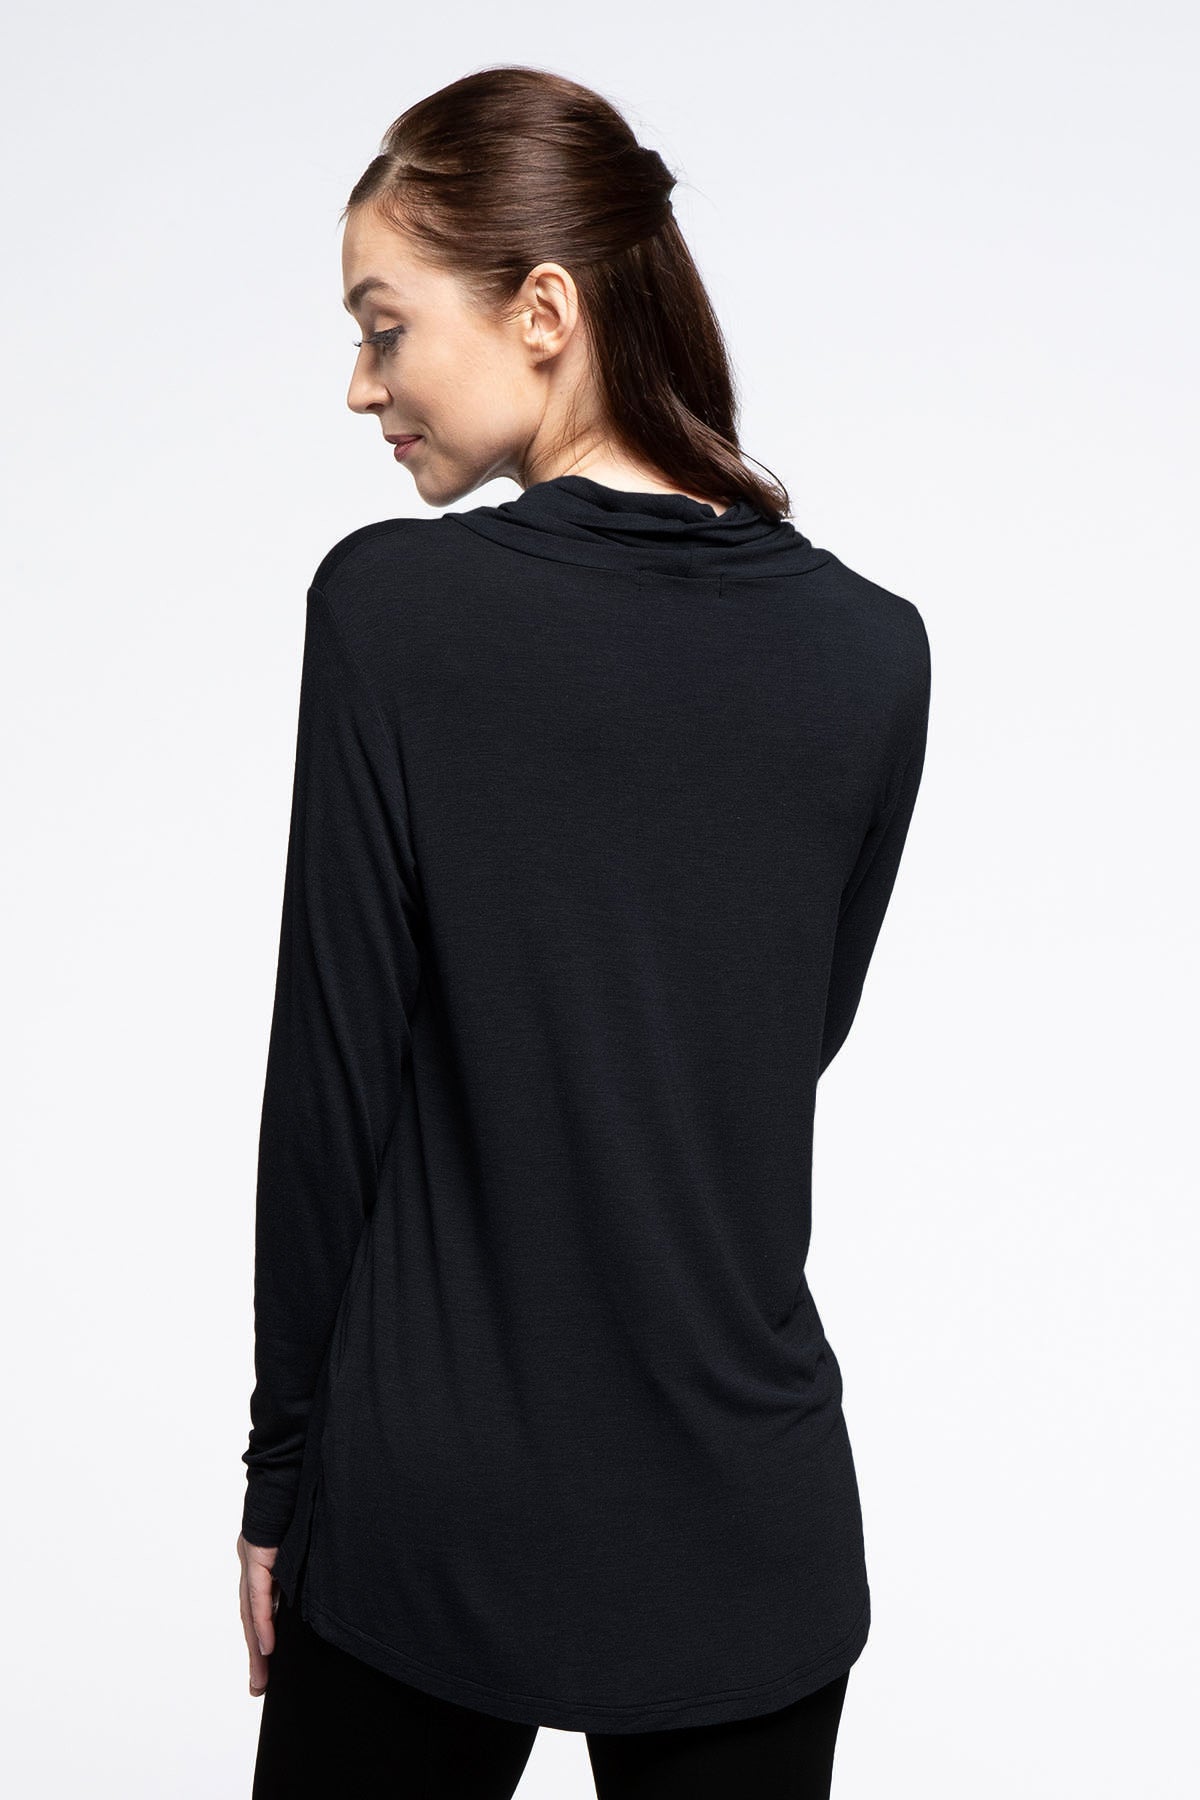 A woman standing with her back to the camera, her head turned to the side, wearing Yala Harper Cowl Neck Long Sleeve Bamboo Shirt in Black